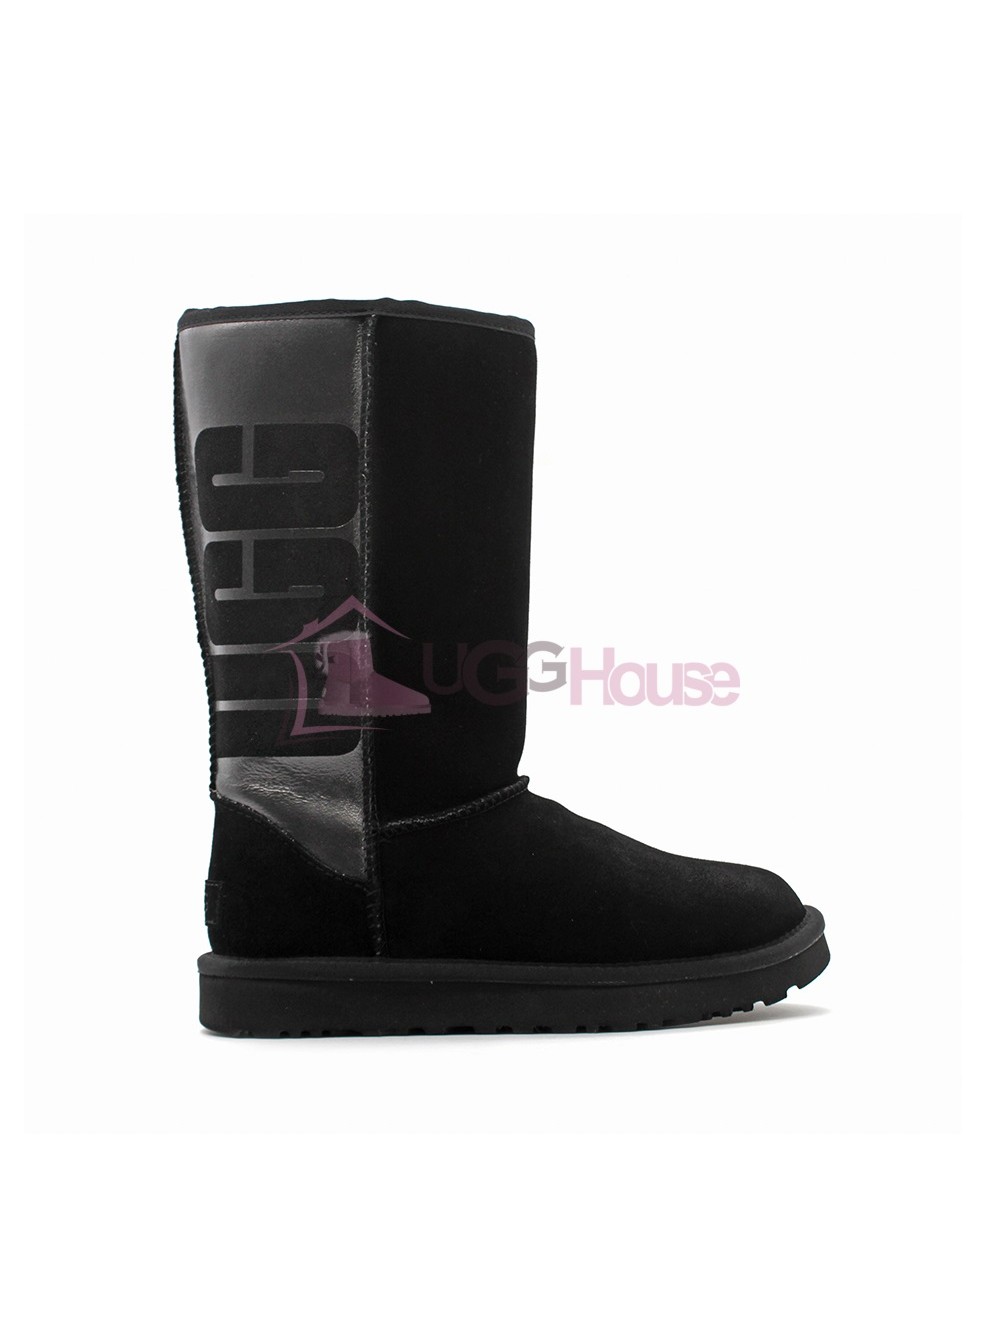 classic tall ugg rubber boot